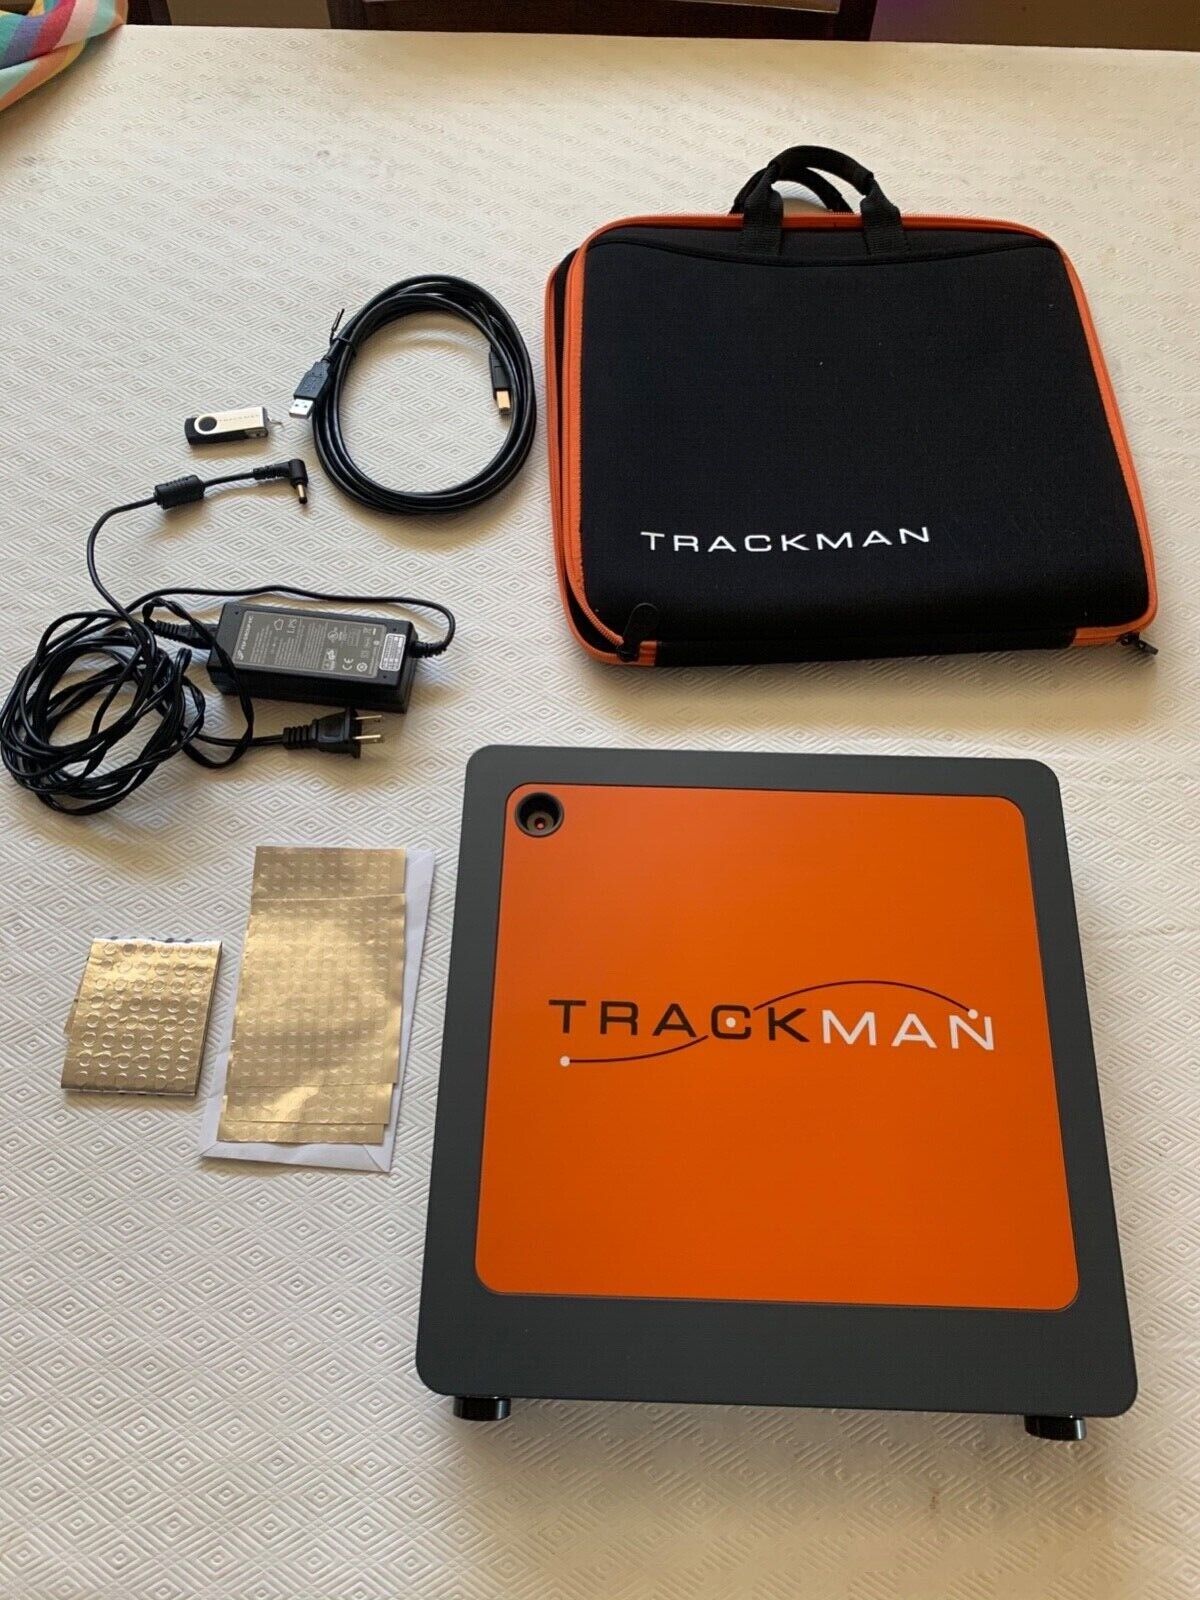 TRACKMAN 3e GOLF LAUNCH MONITOR INDOOR / OUTDOOR